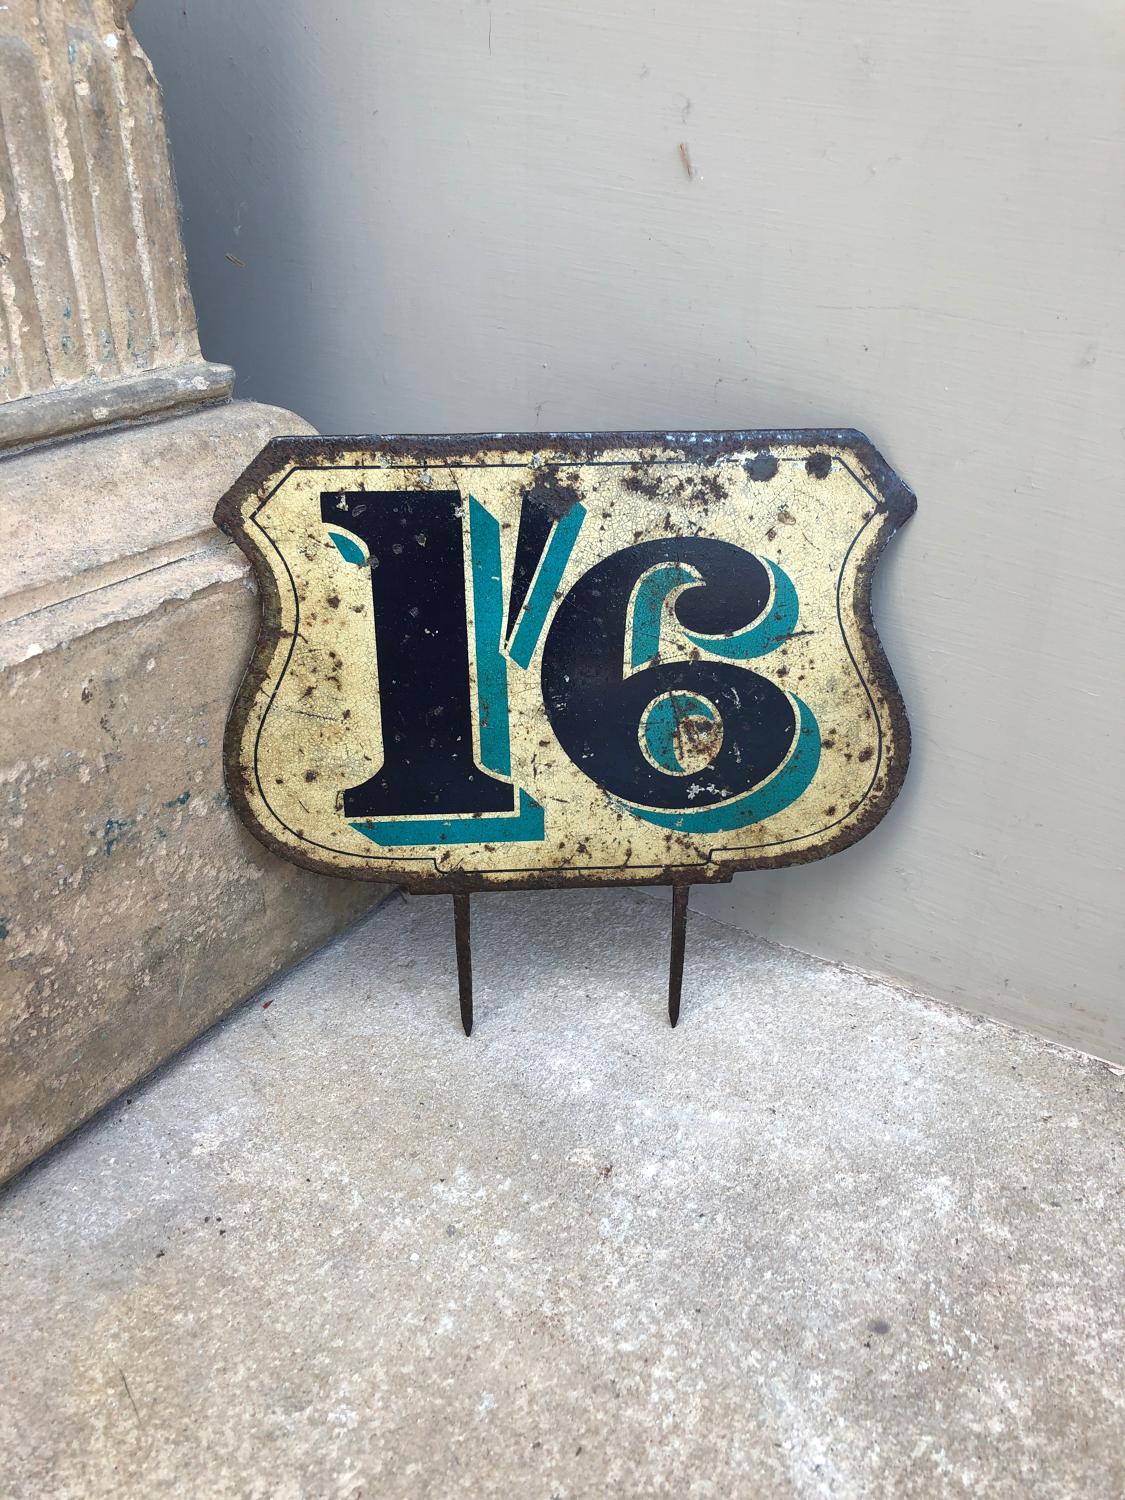 Large Edwardian Toleware Grocers Price Sign